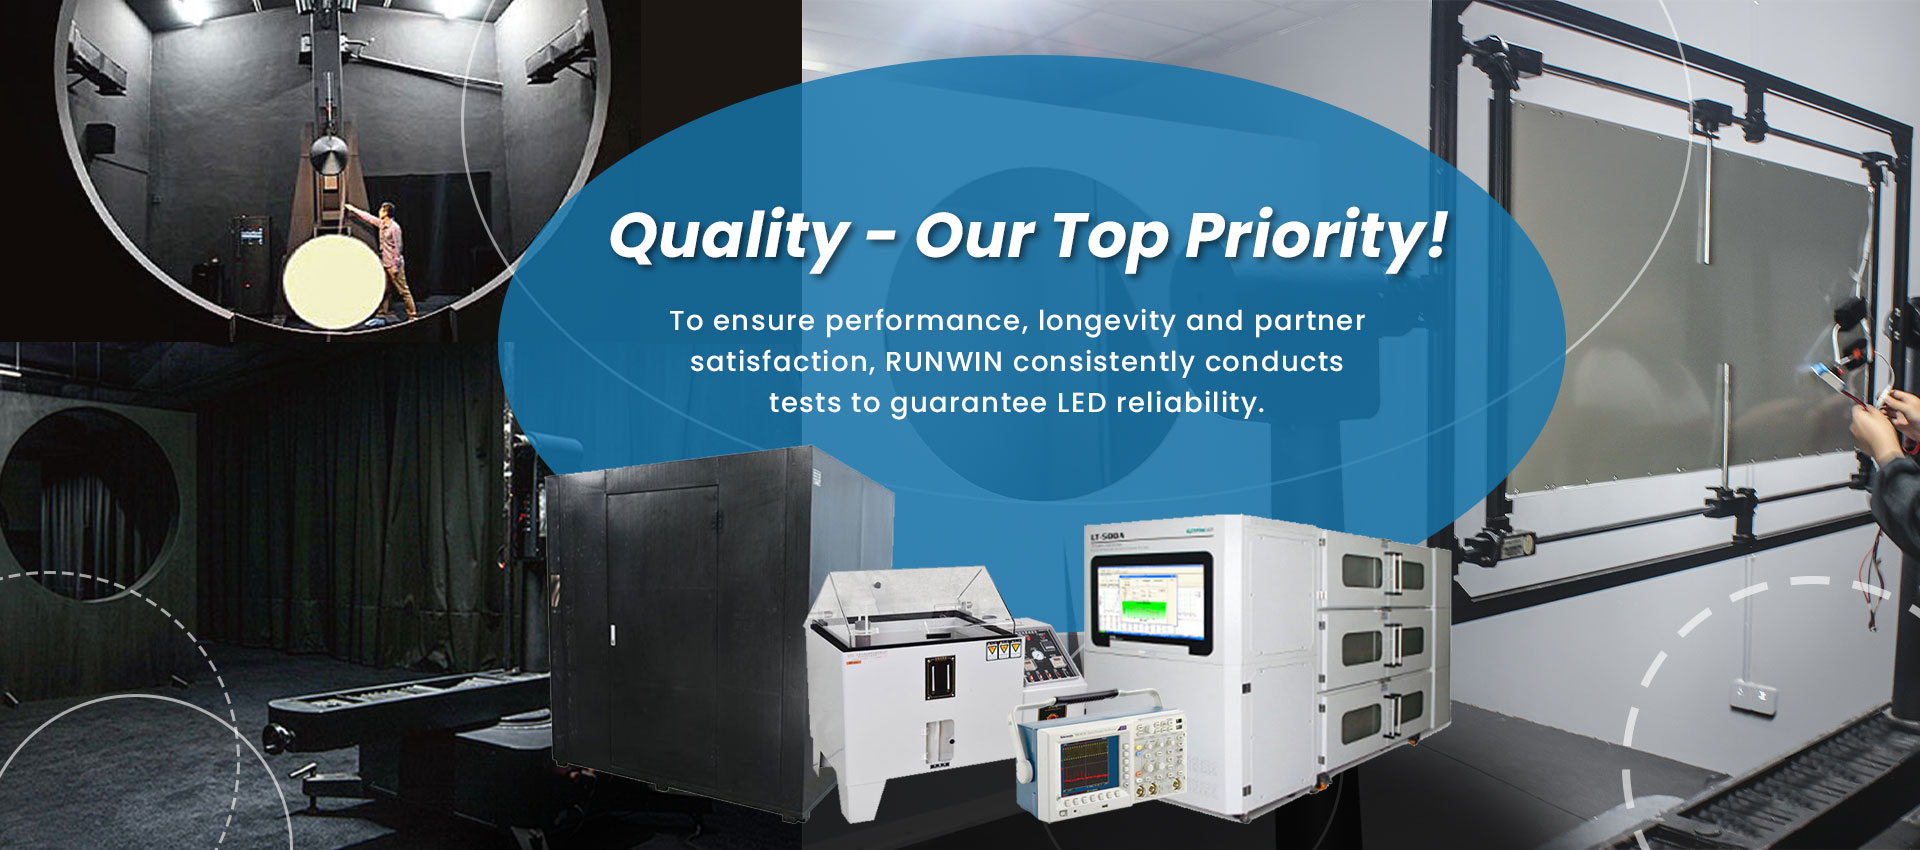 Quality - Our Top Priority!